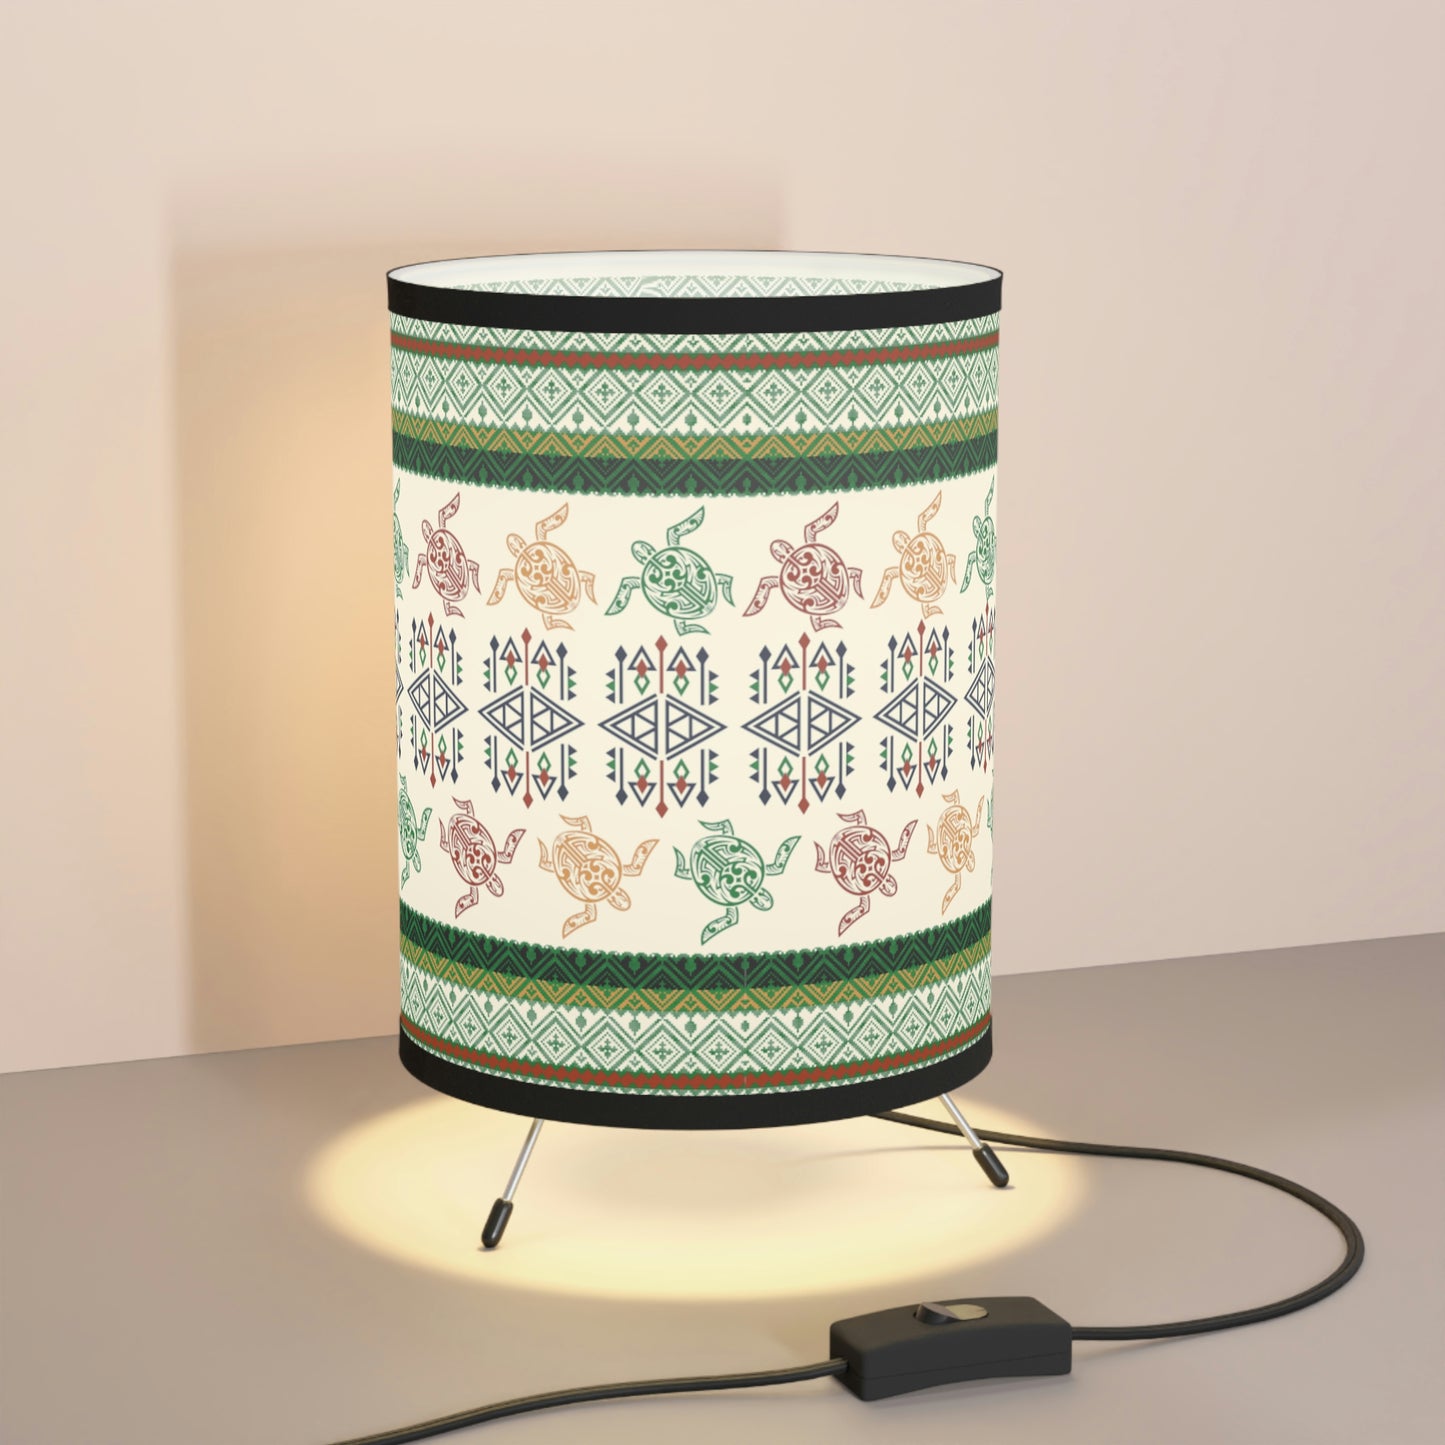 Limited Edition Aboriginal Indigenous American Niiji Inspired Shade and Tripod Lamp